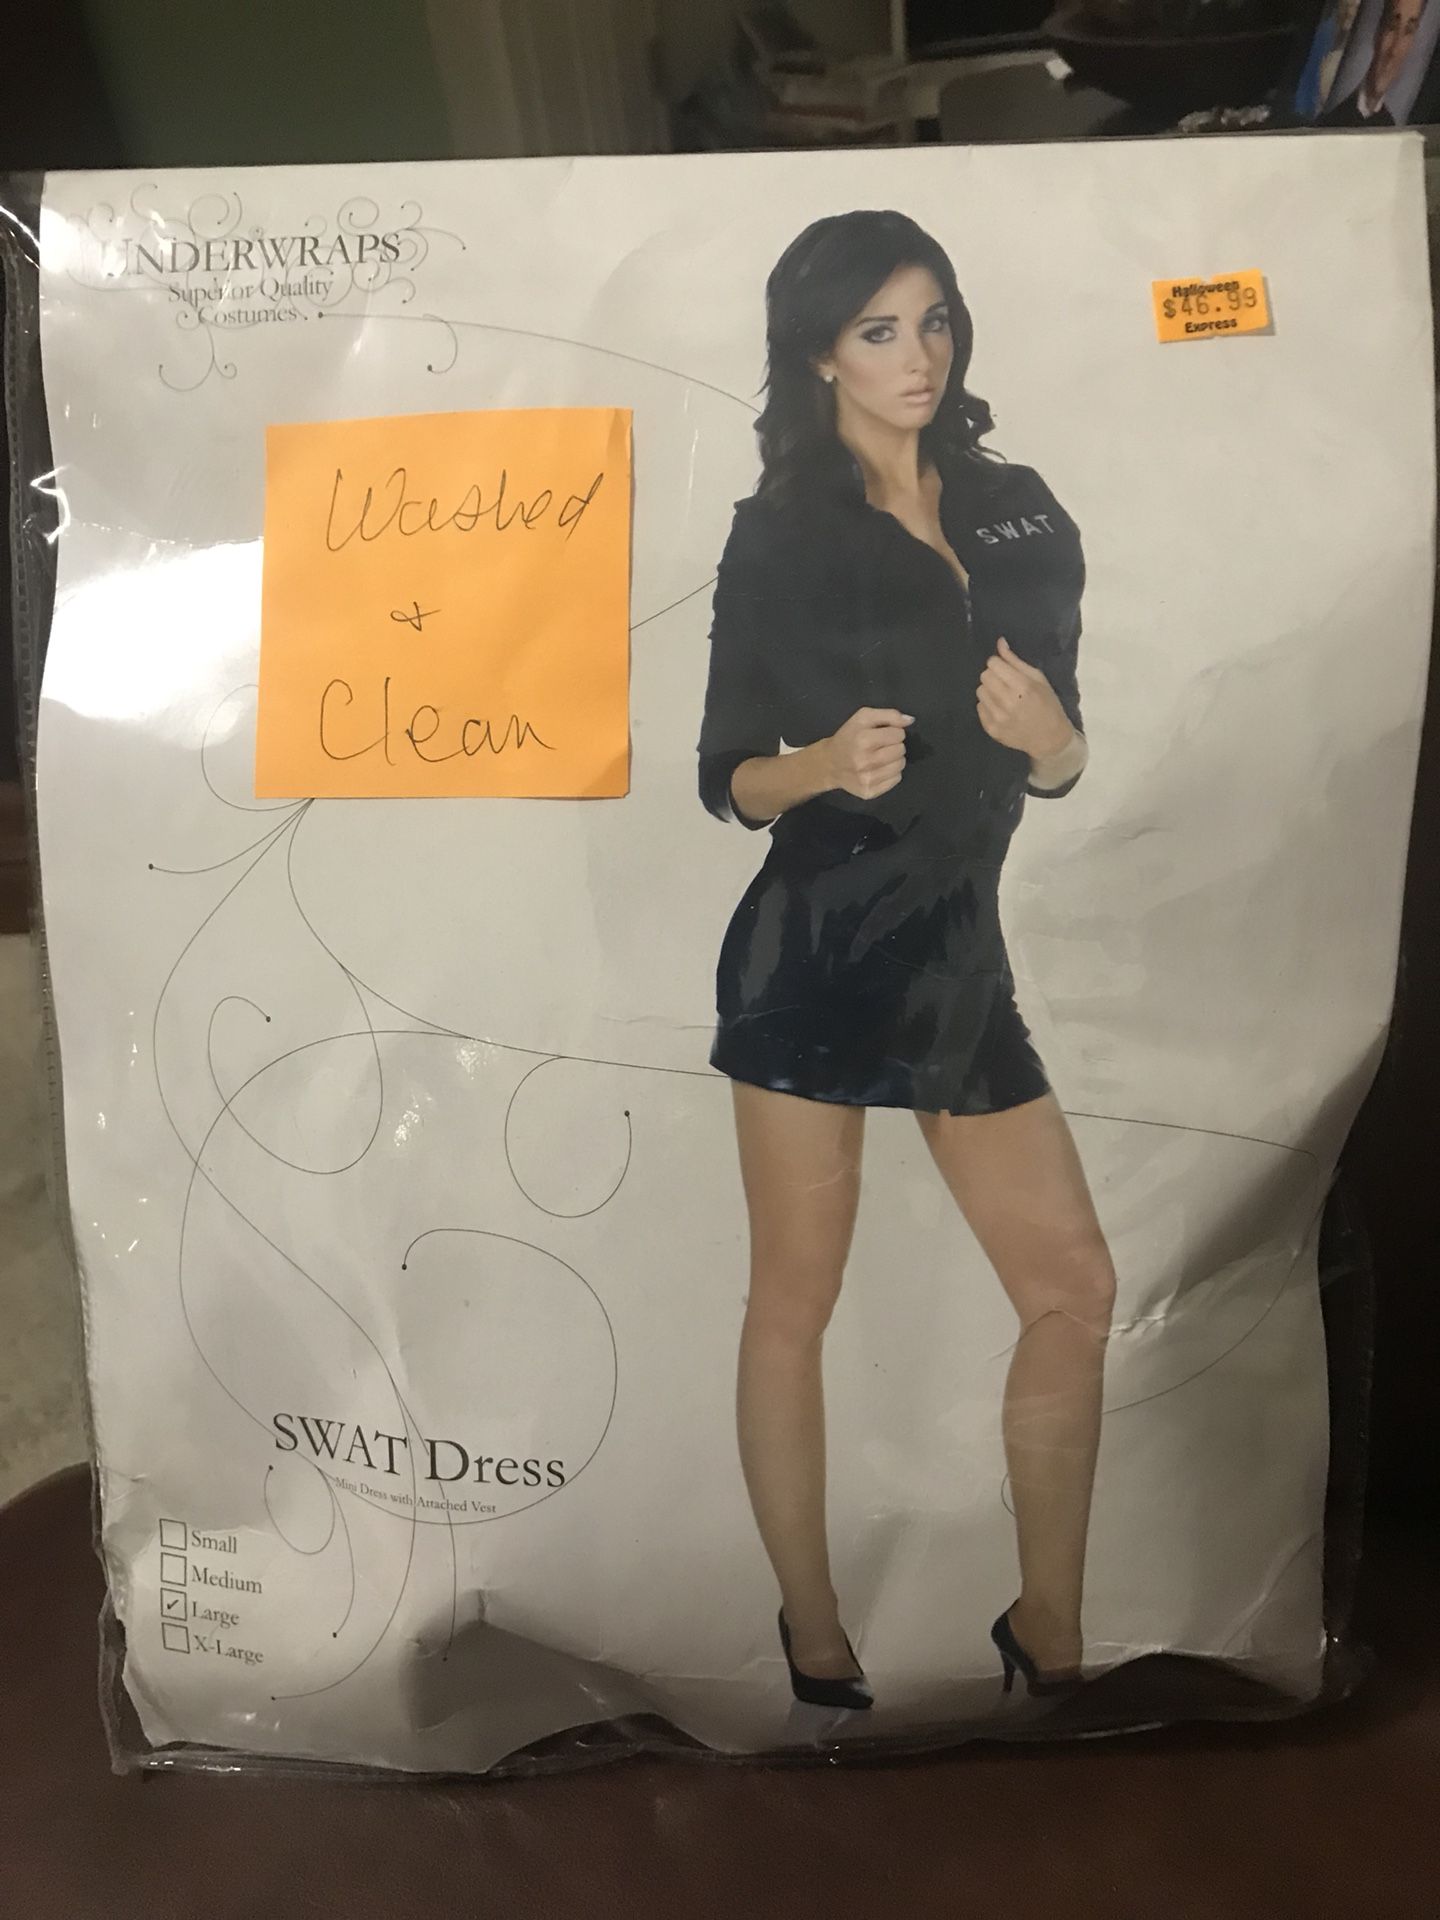 Large Swat Woman Halloween Costume. Like brand new. I washed it and it’s clean and ready to wear. Looks great on and has knee highs. It cost 46.99 +